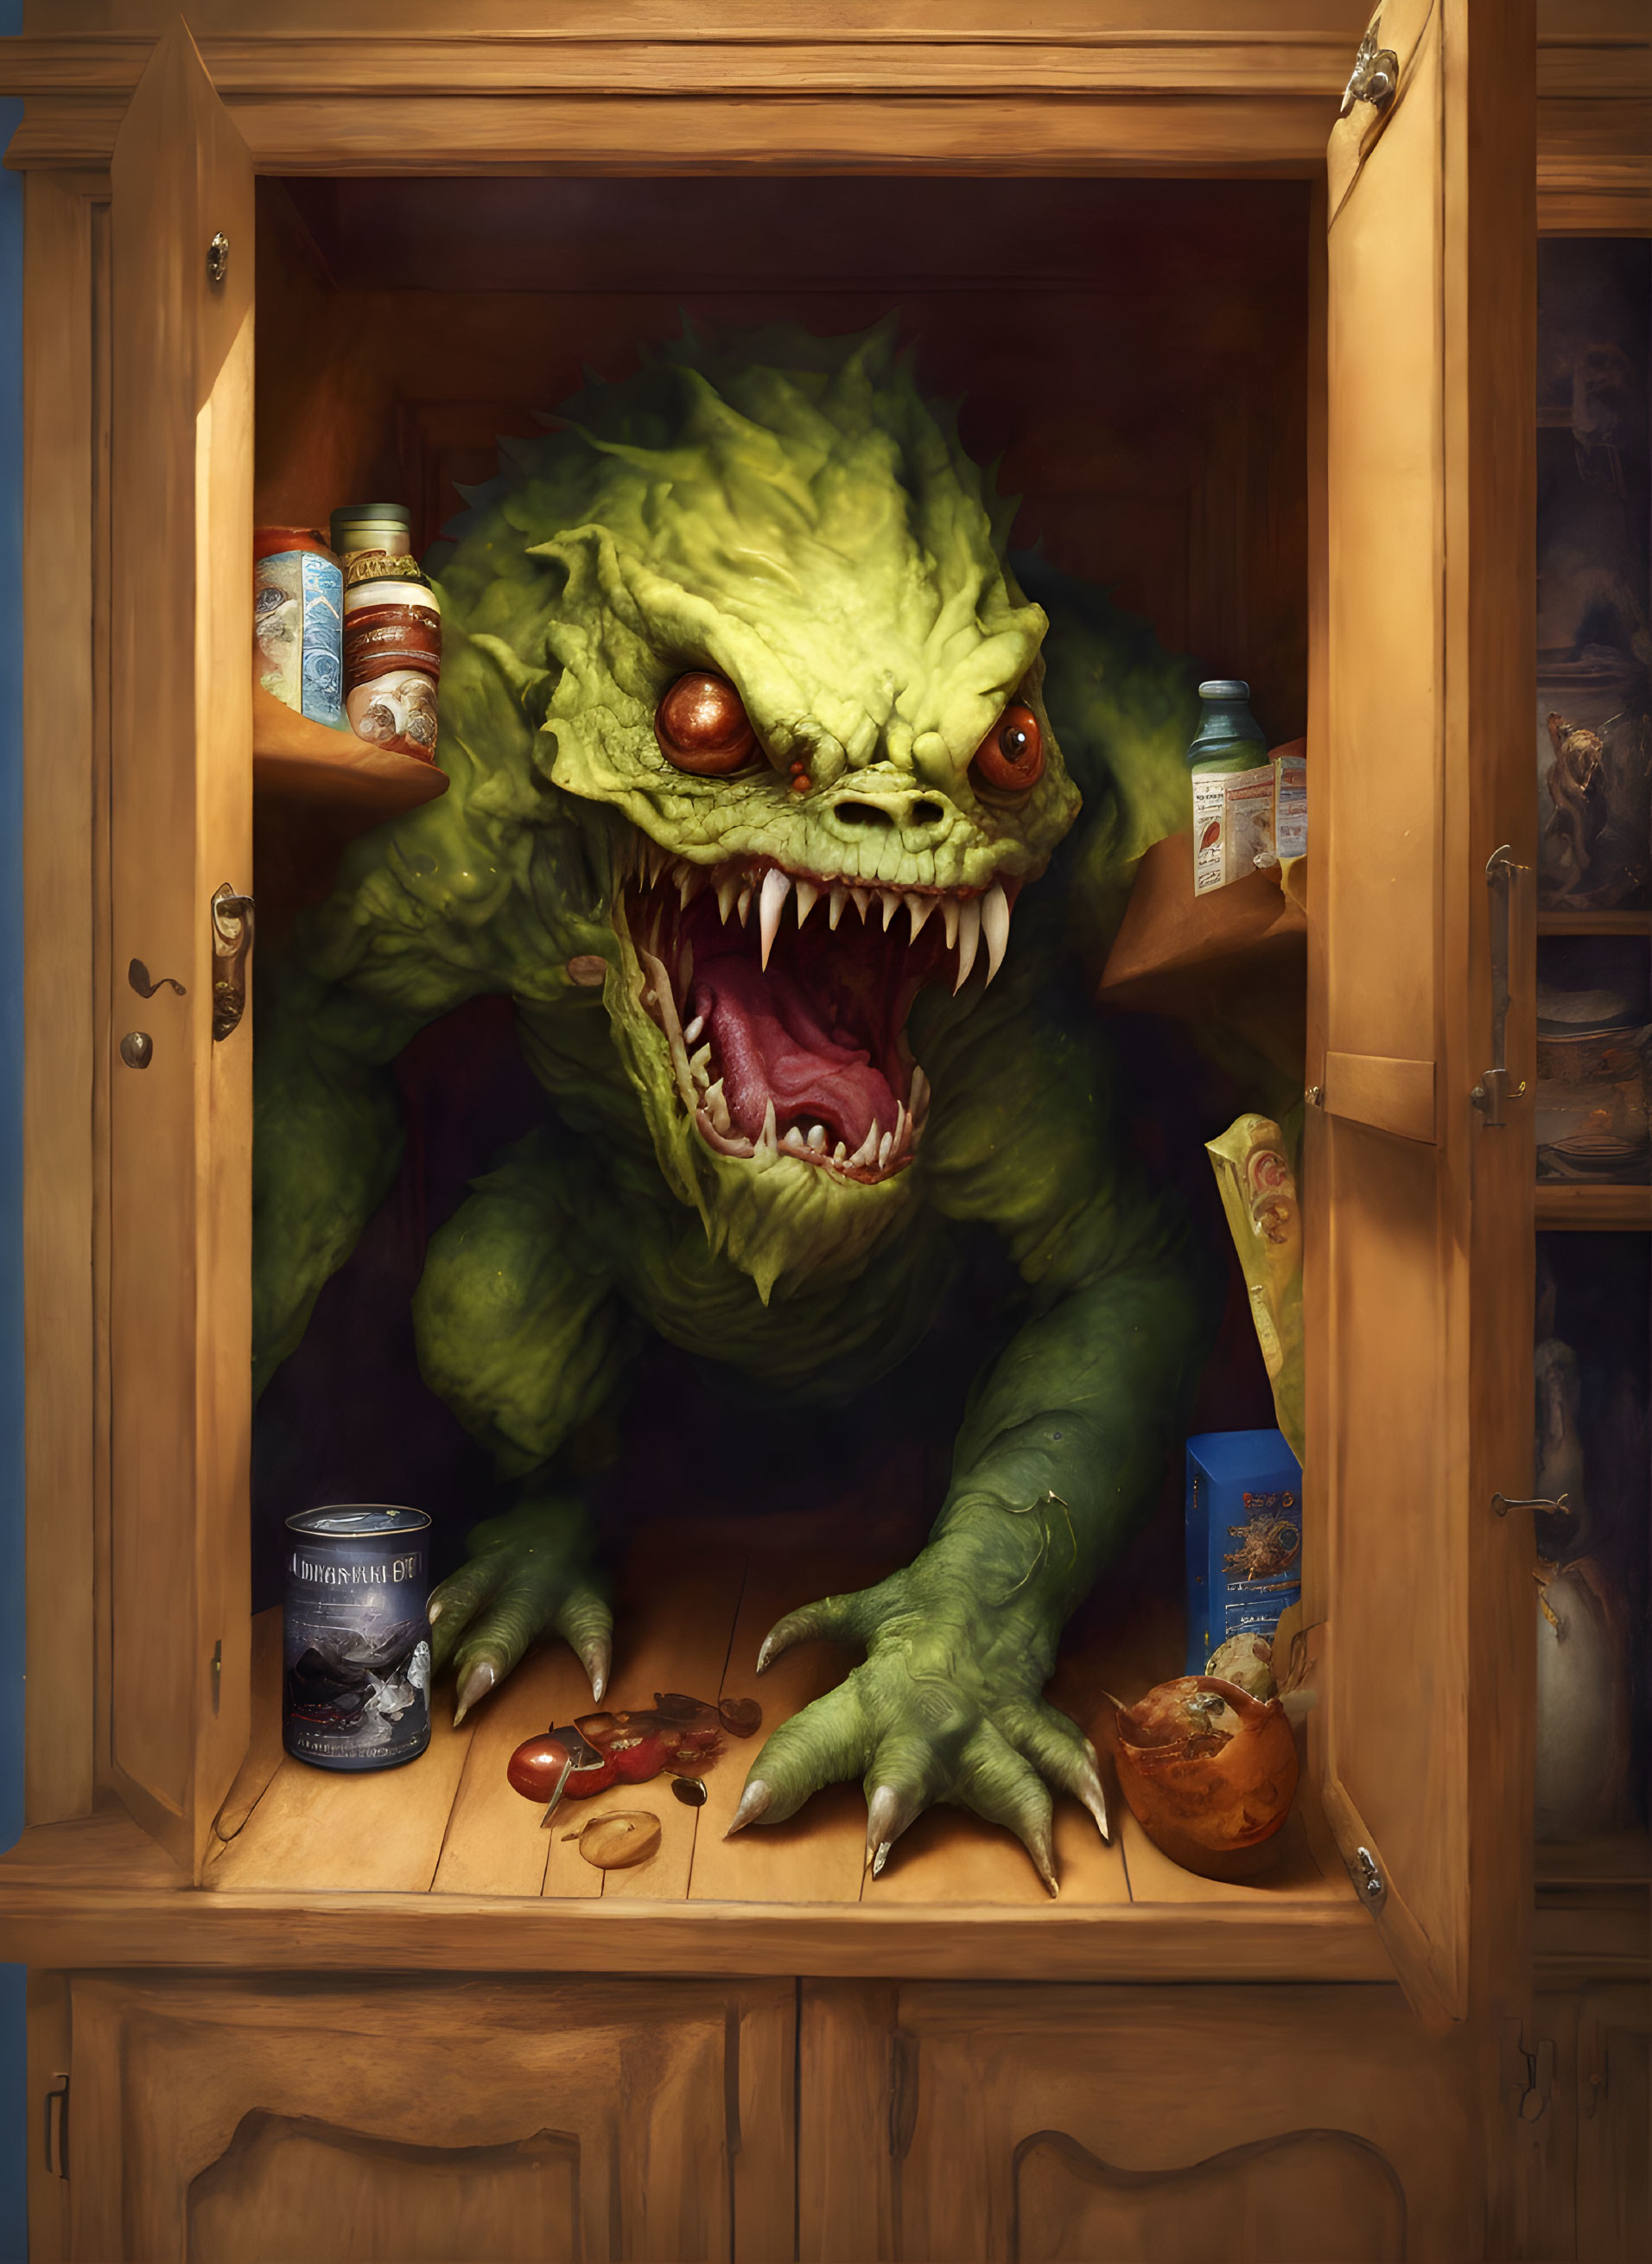 Monster comes out of my pantry